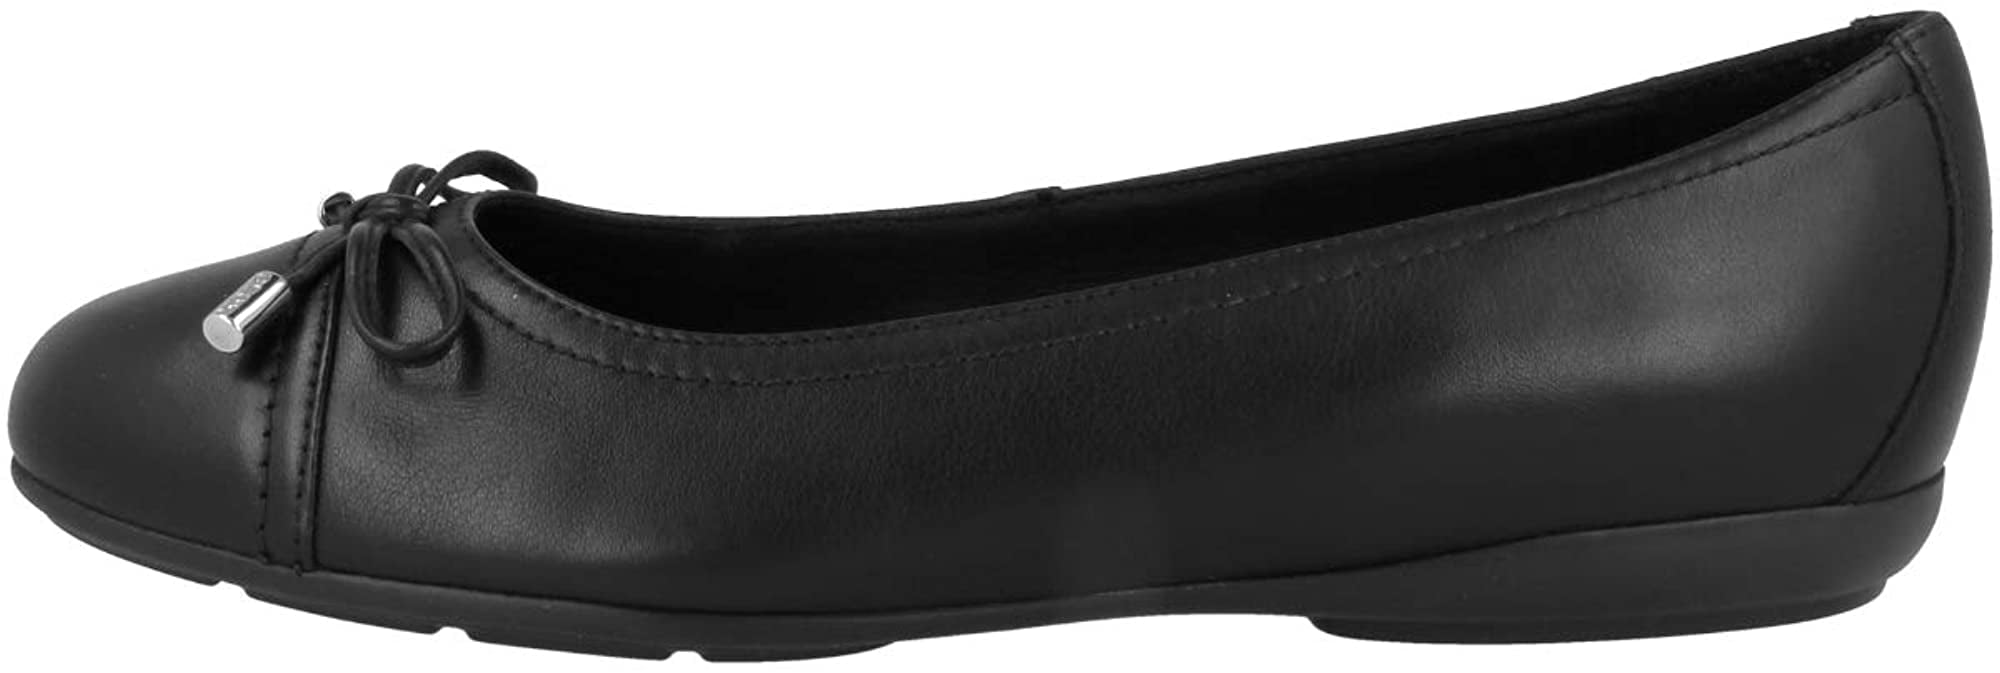 Geox Womens Annitah 9 Nappa Leather Ballet Flat with Arch Support and Cushioning